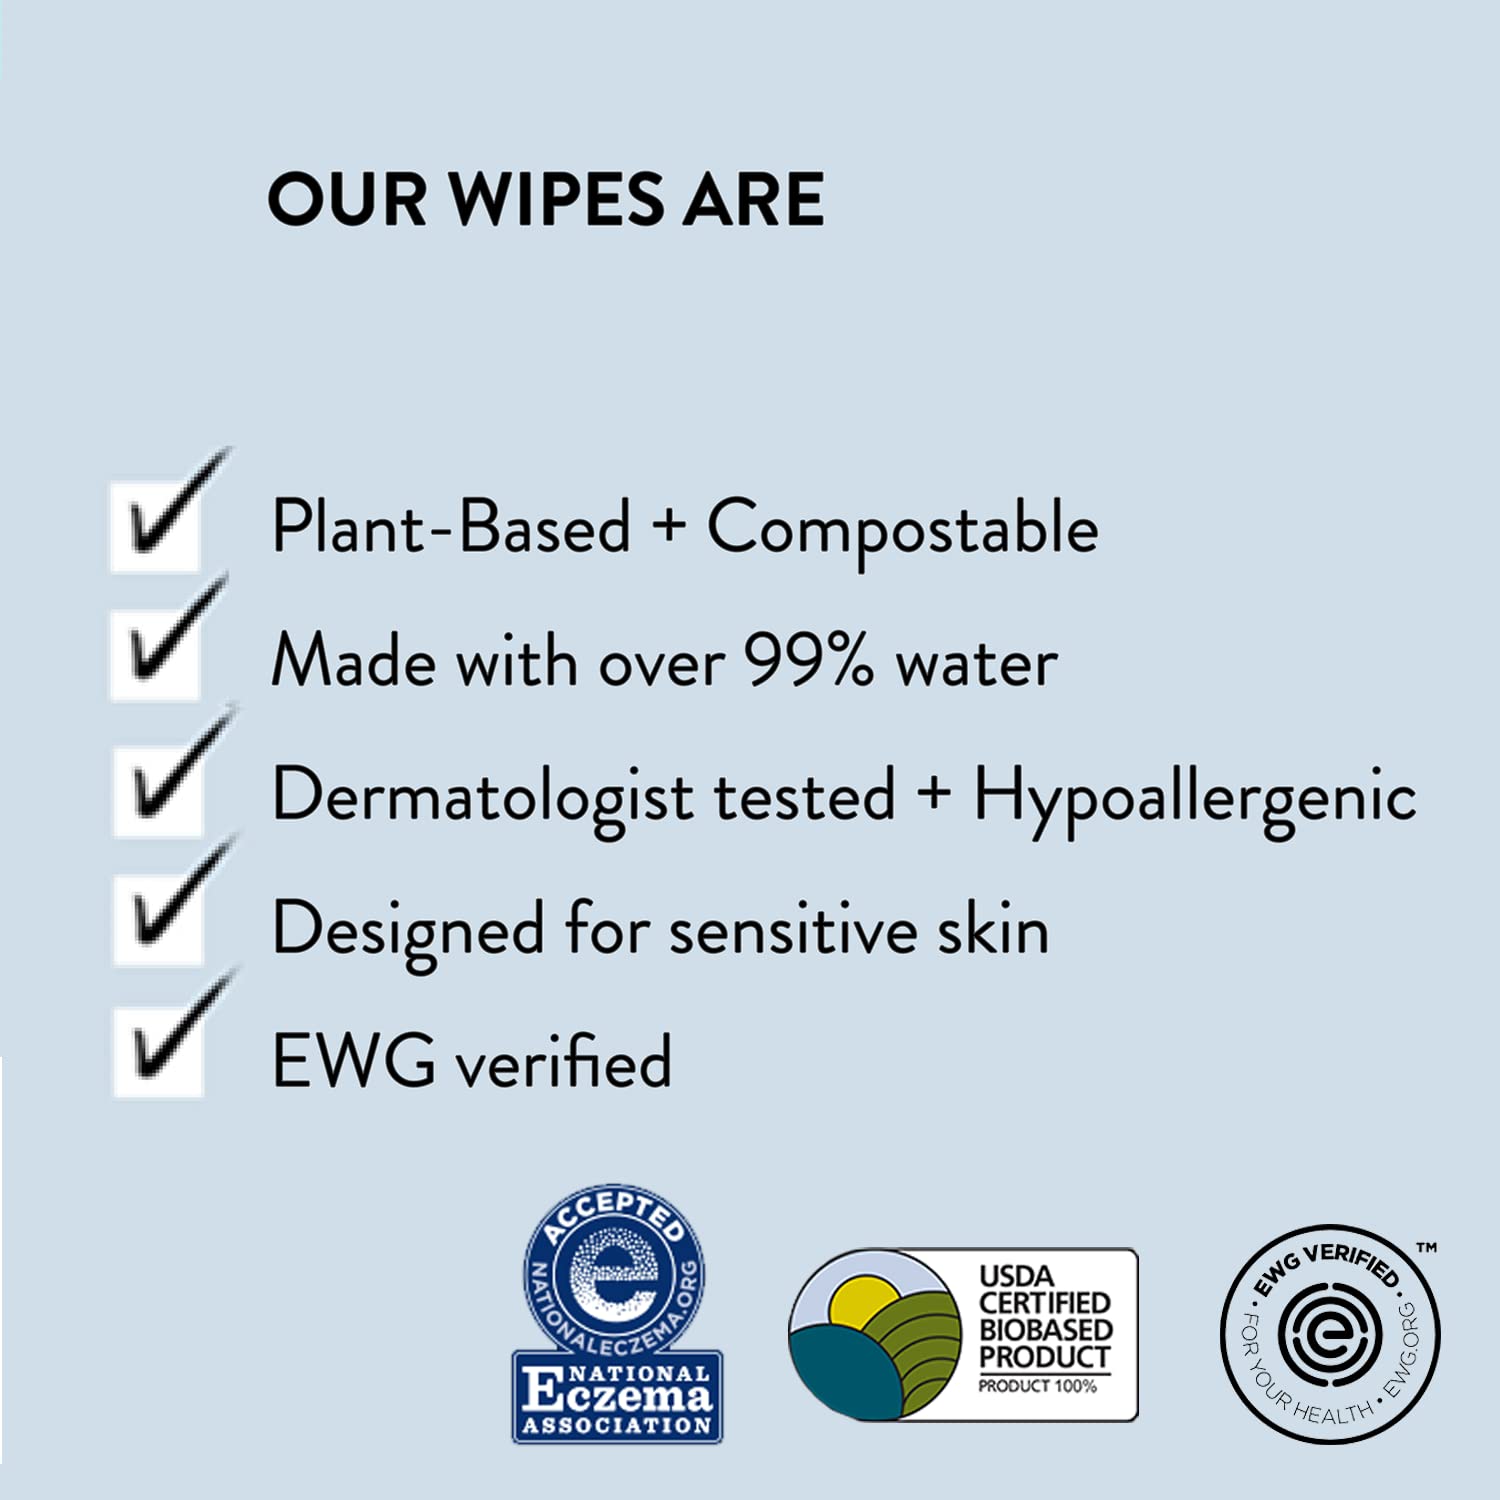 The Honest Company Clean Conscious Wipes | 99% Water, Compostable, Plant-Based, Baby Wipes | Hypoallergenic, EWG Verified | Rose Blossom, 60 Count